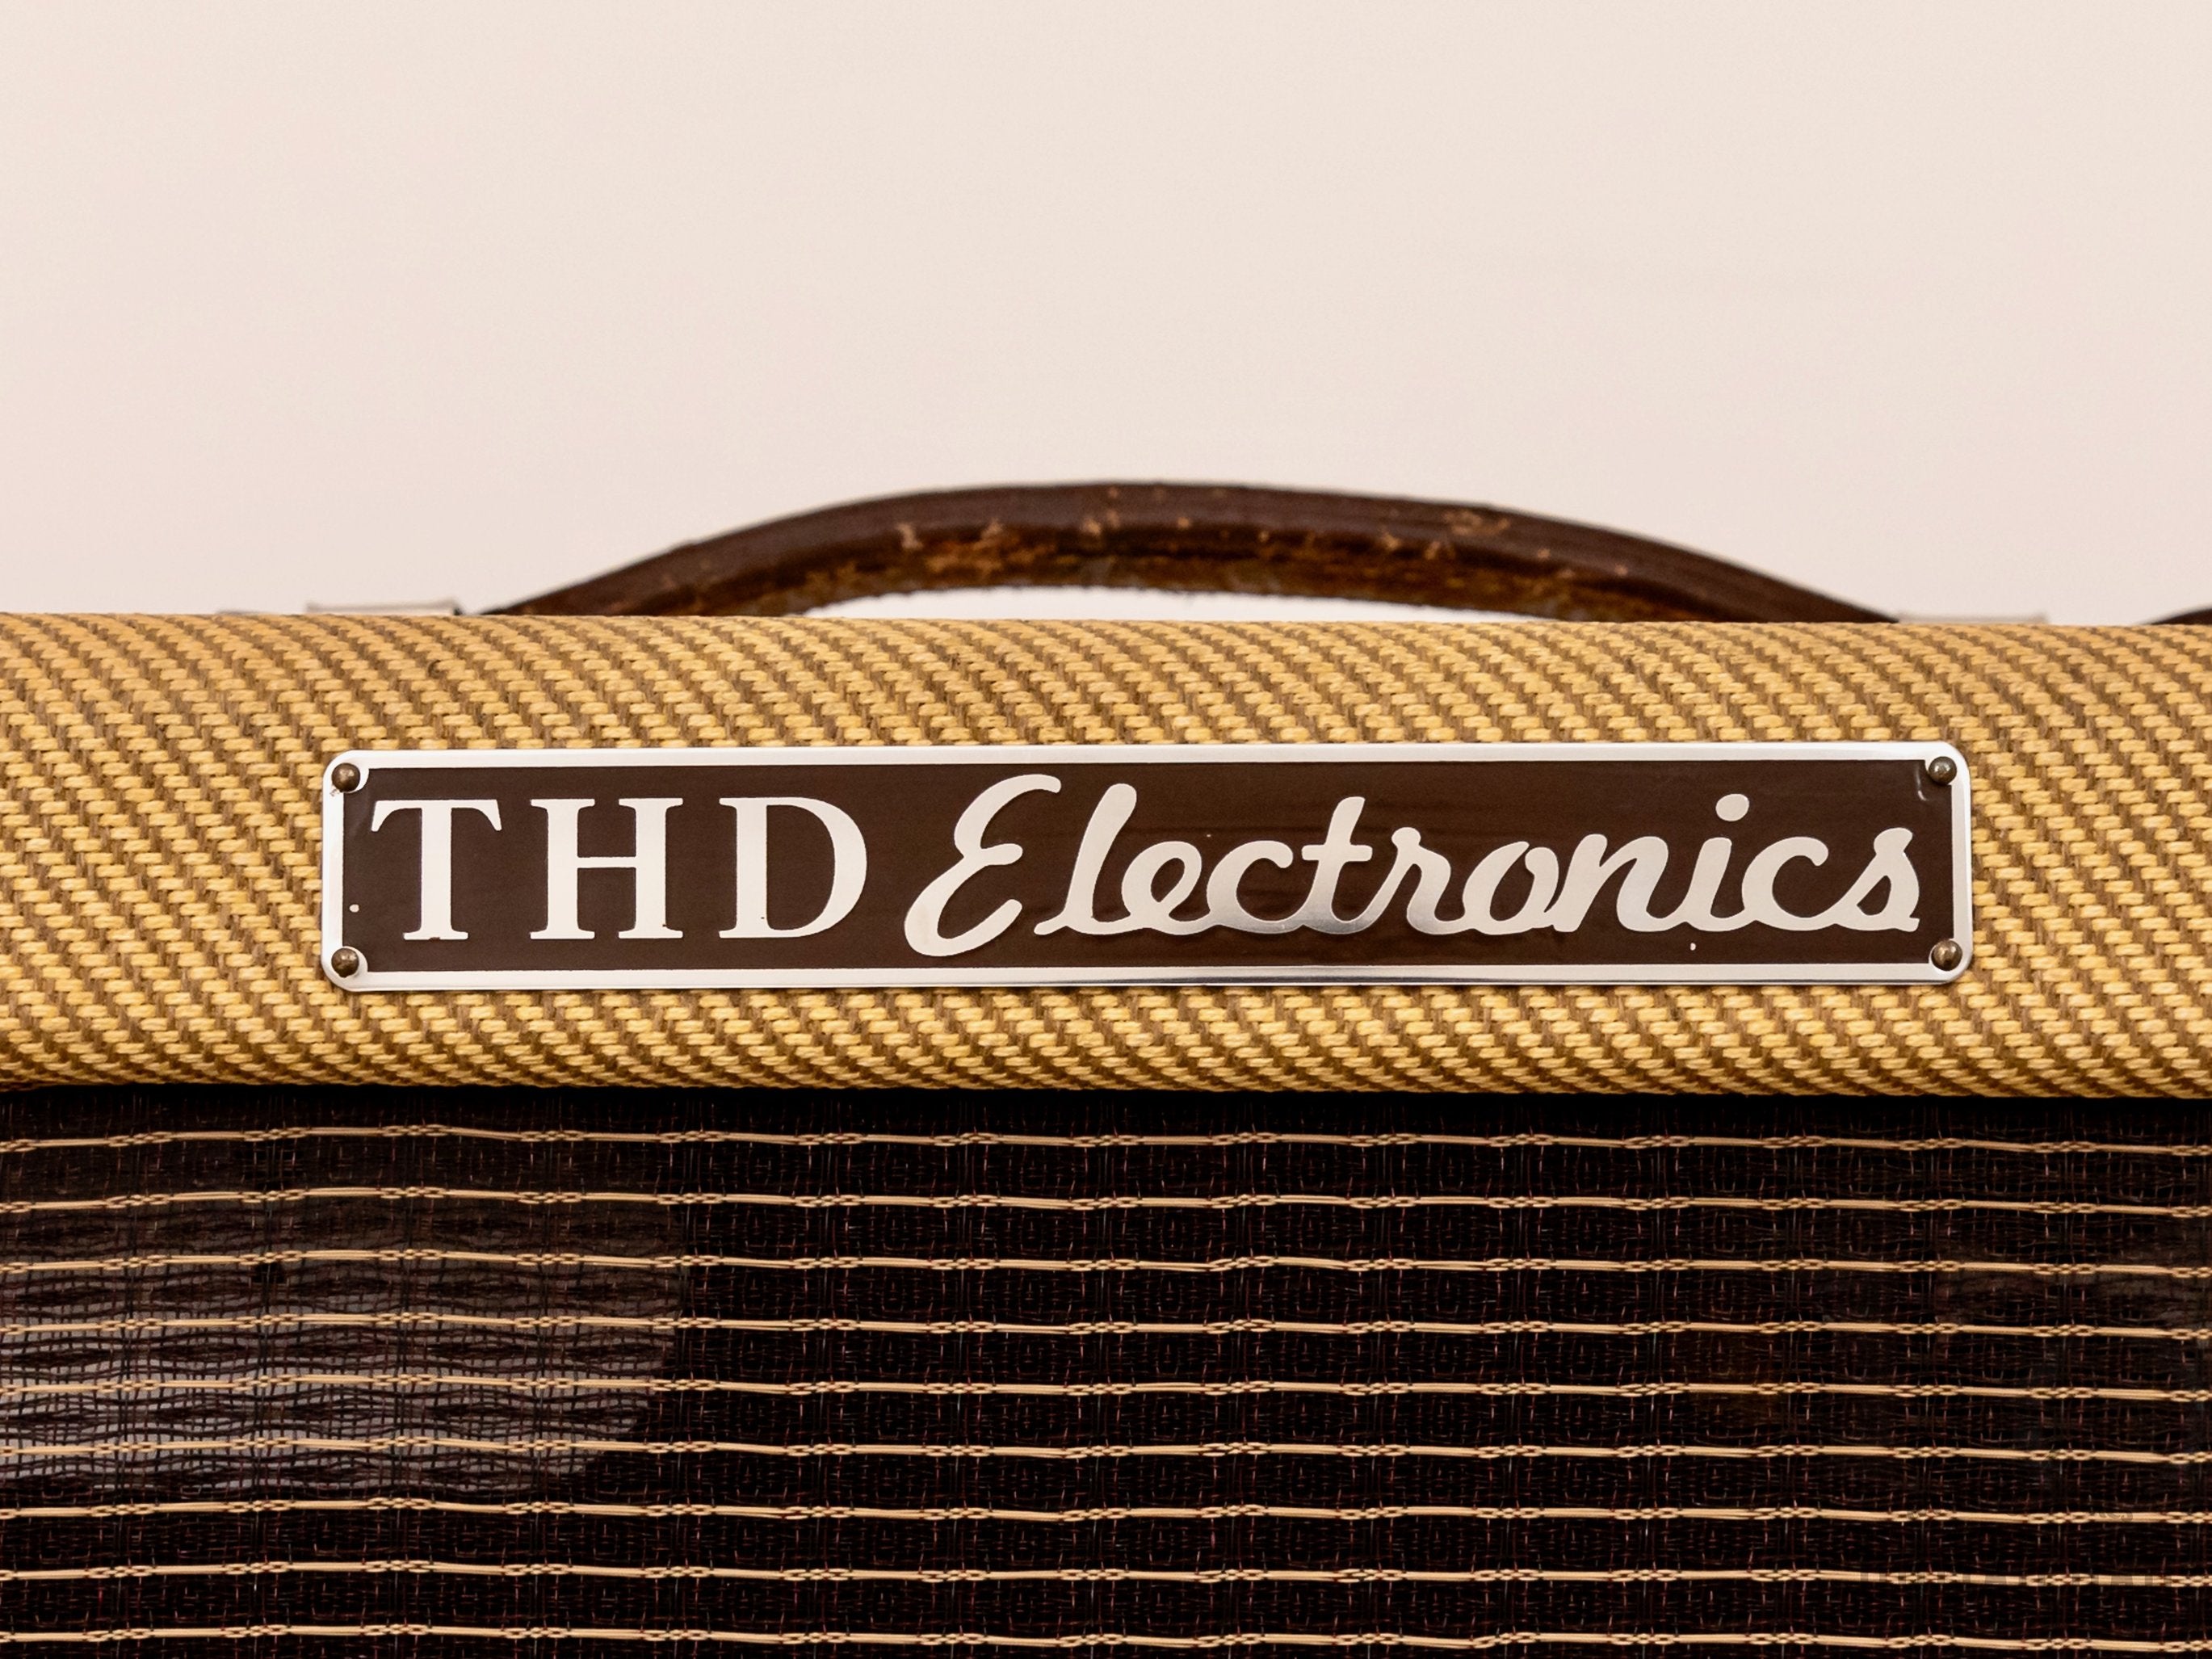 1989 THD Plexi 50 Boutique Tube Amp Head & 2x12 Cab, Tweed-Covered w/ Celestion Longhorn 12